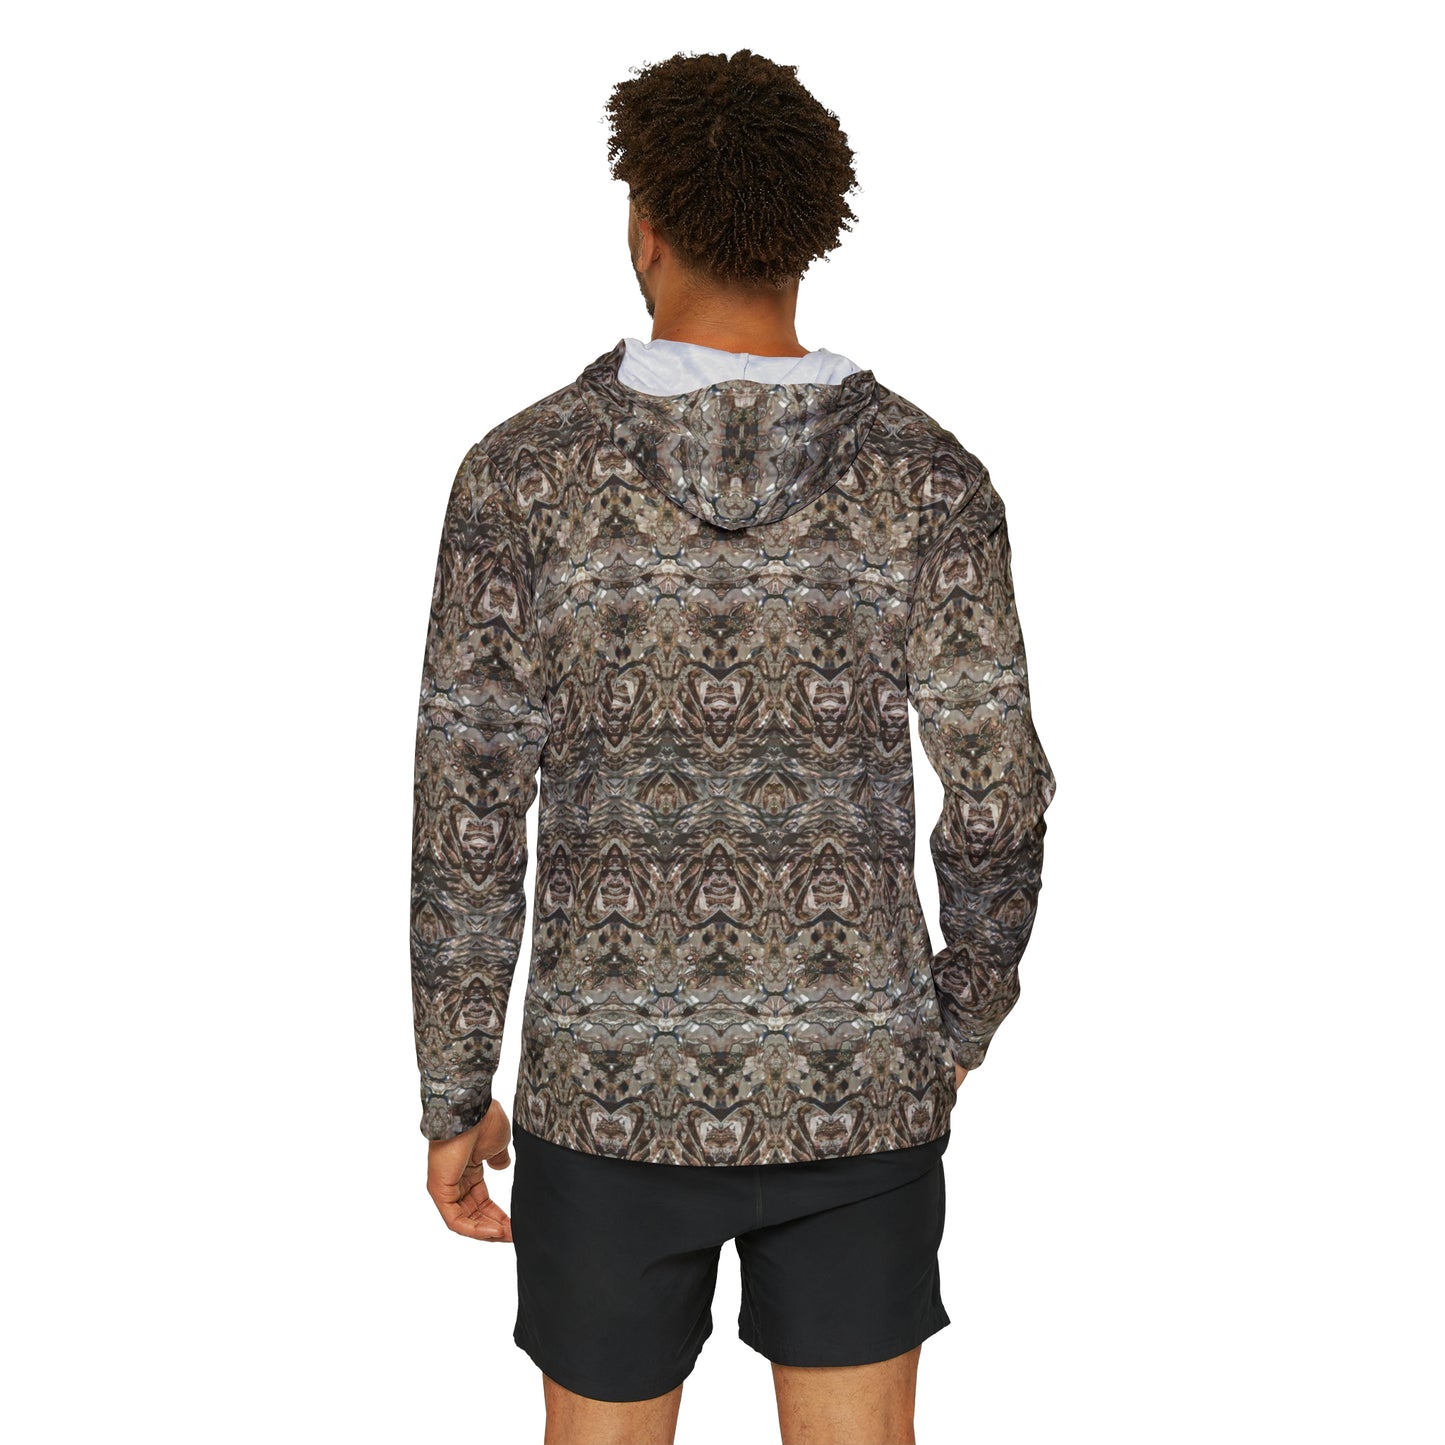 Athletic Activewear Hoodie (His/They)(Samhain Dream Thaw 15 of 15 Quindecim ex Quindecim) RJSTH@w2023 RJS